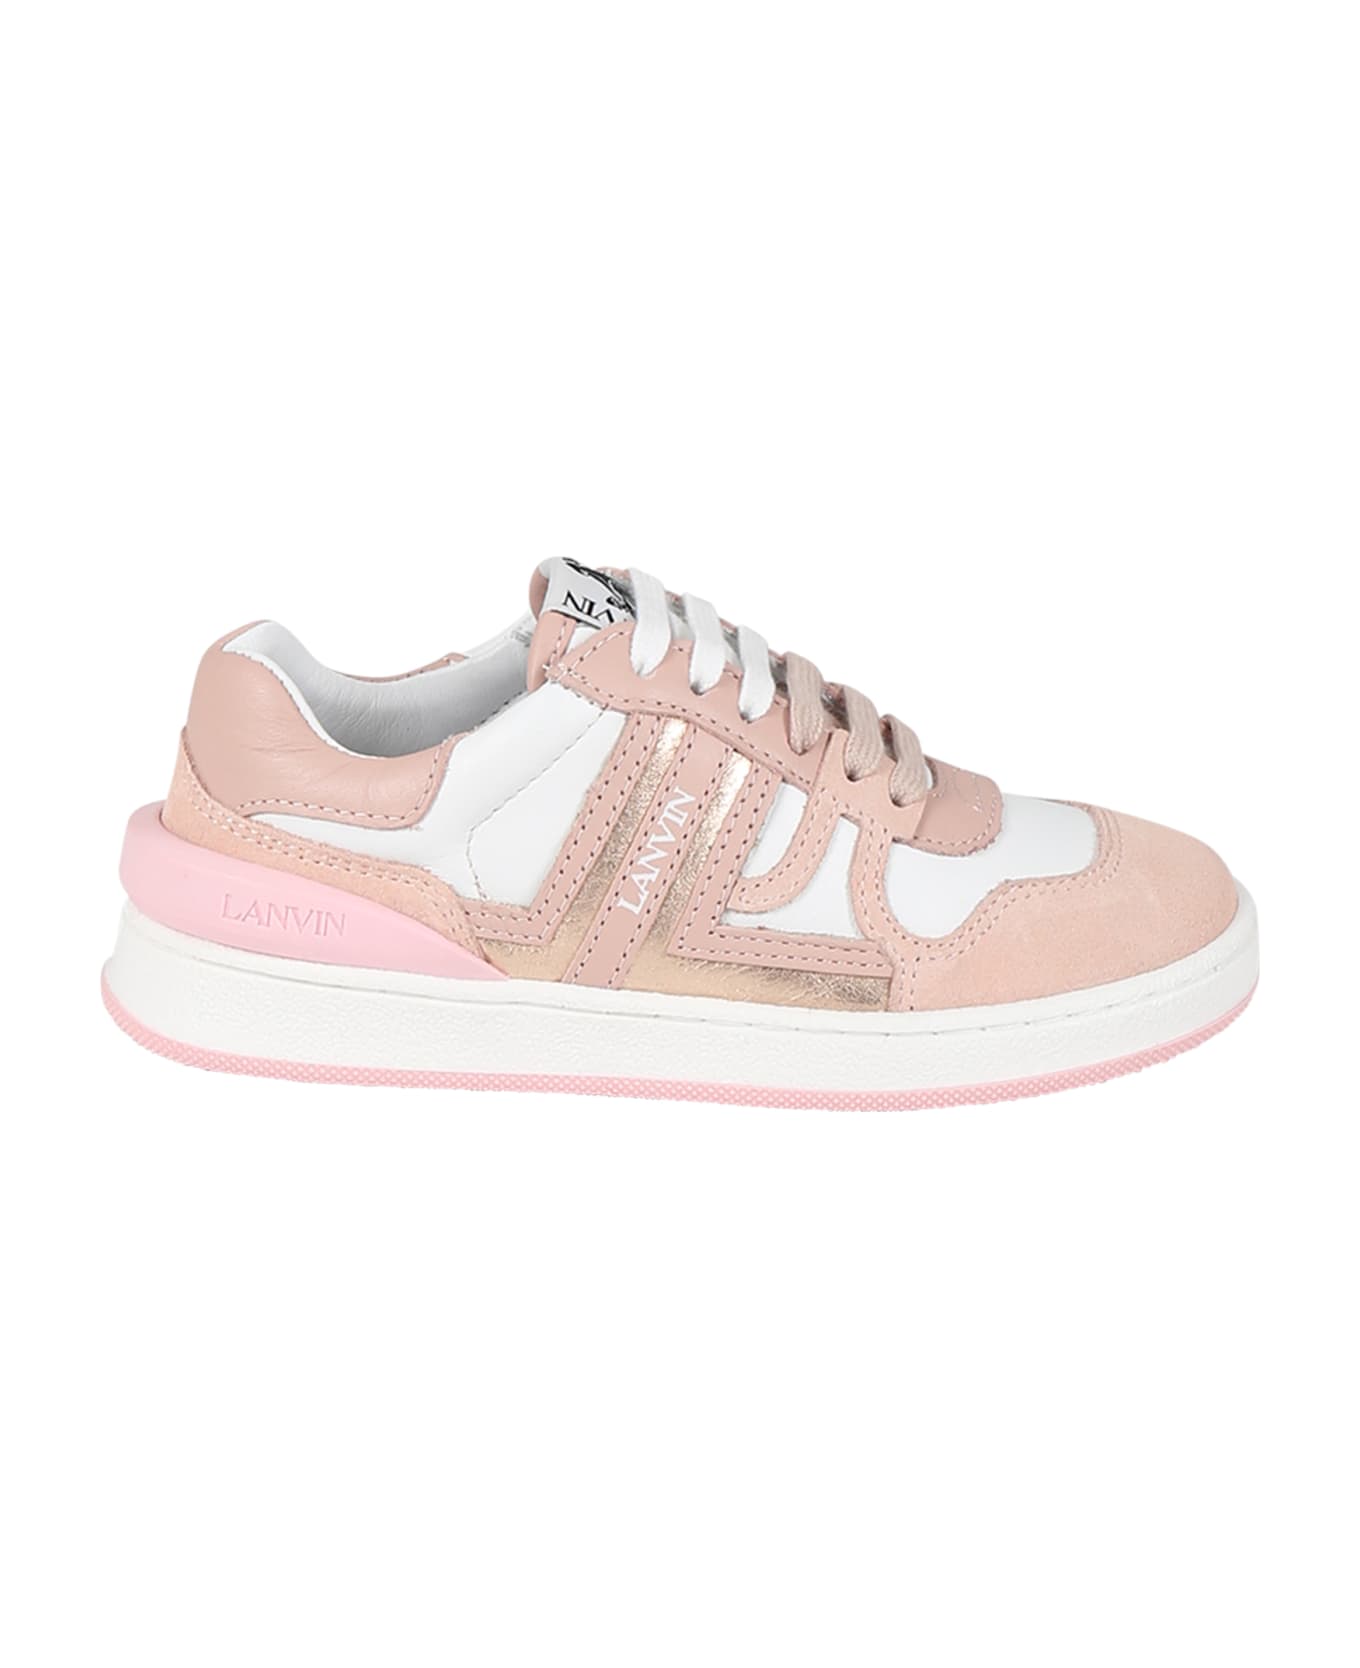 Lanvin Pink Sneakers For Girl With Logo - Pink